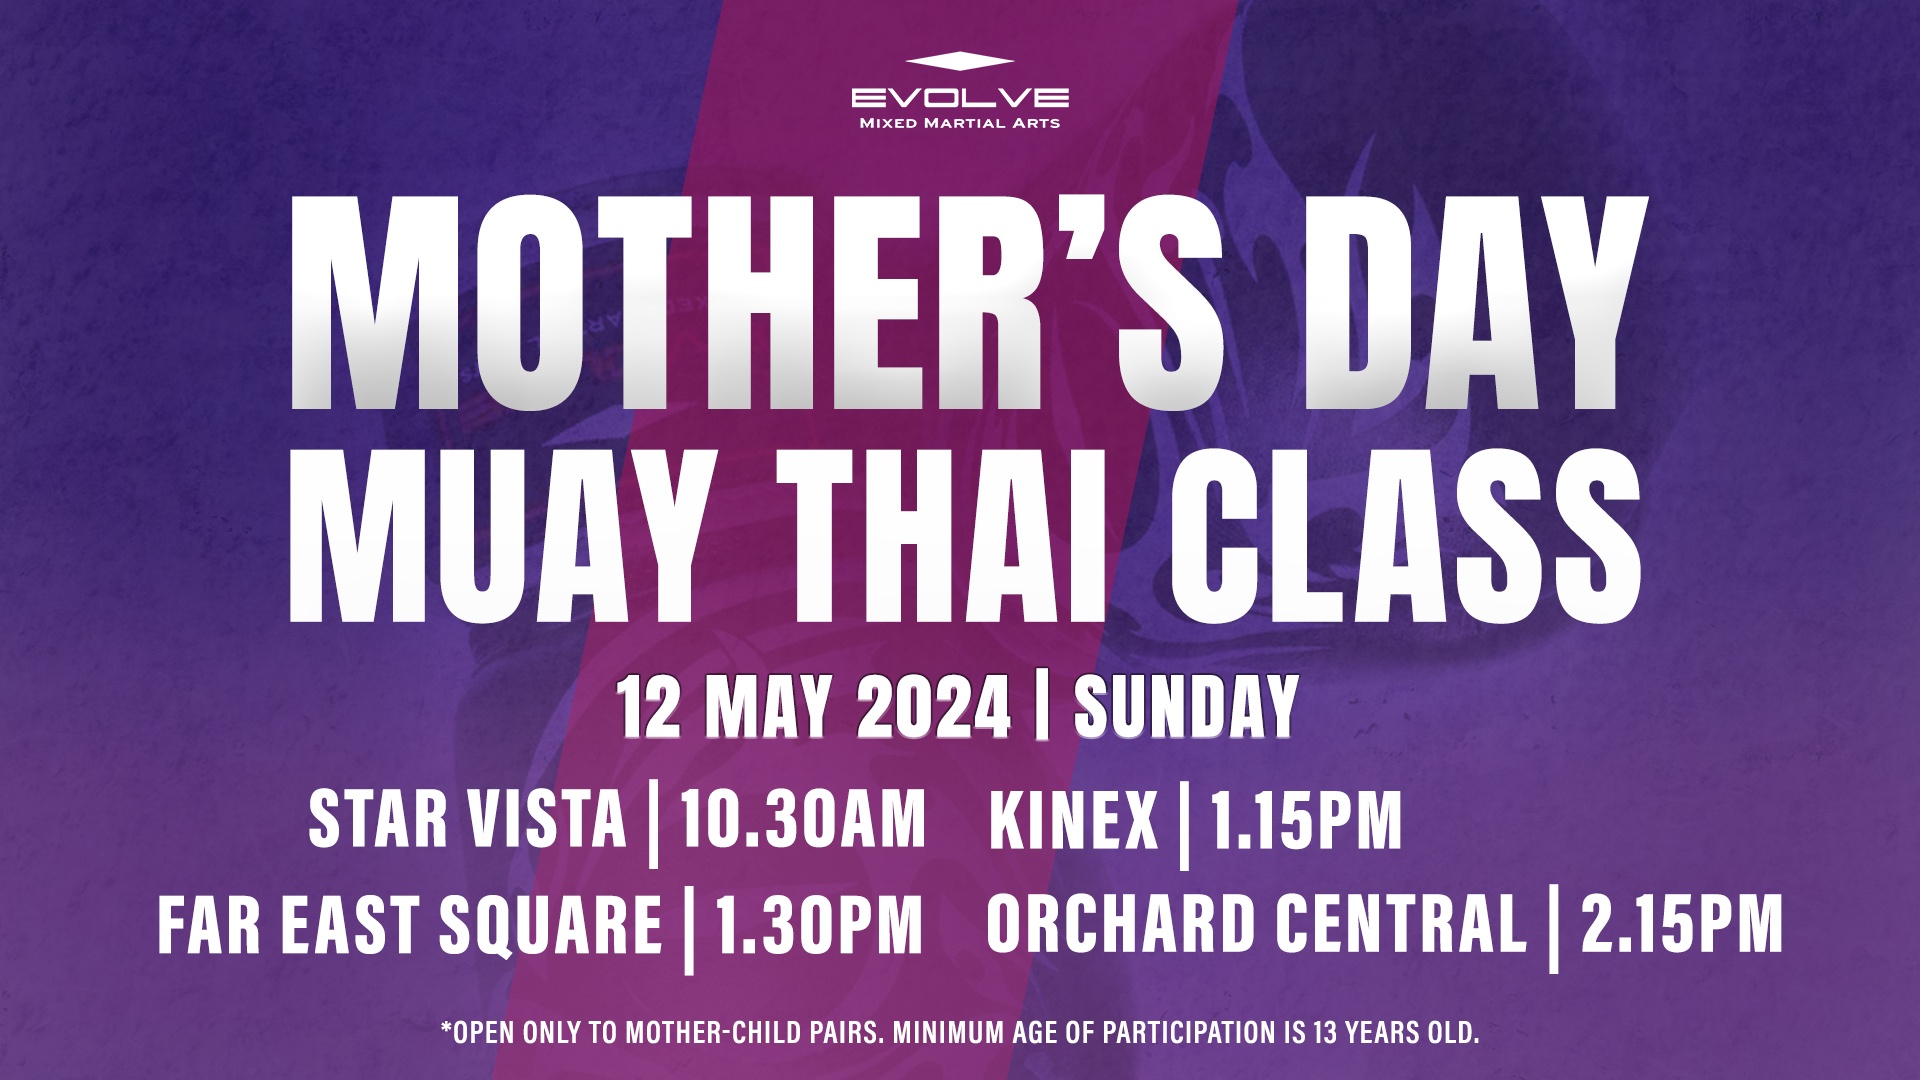 Mother’s Day Muay Thai Class